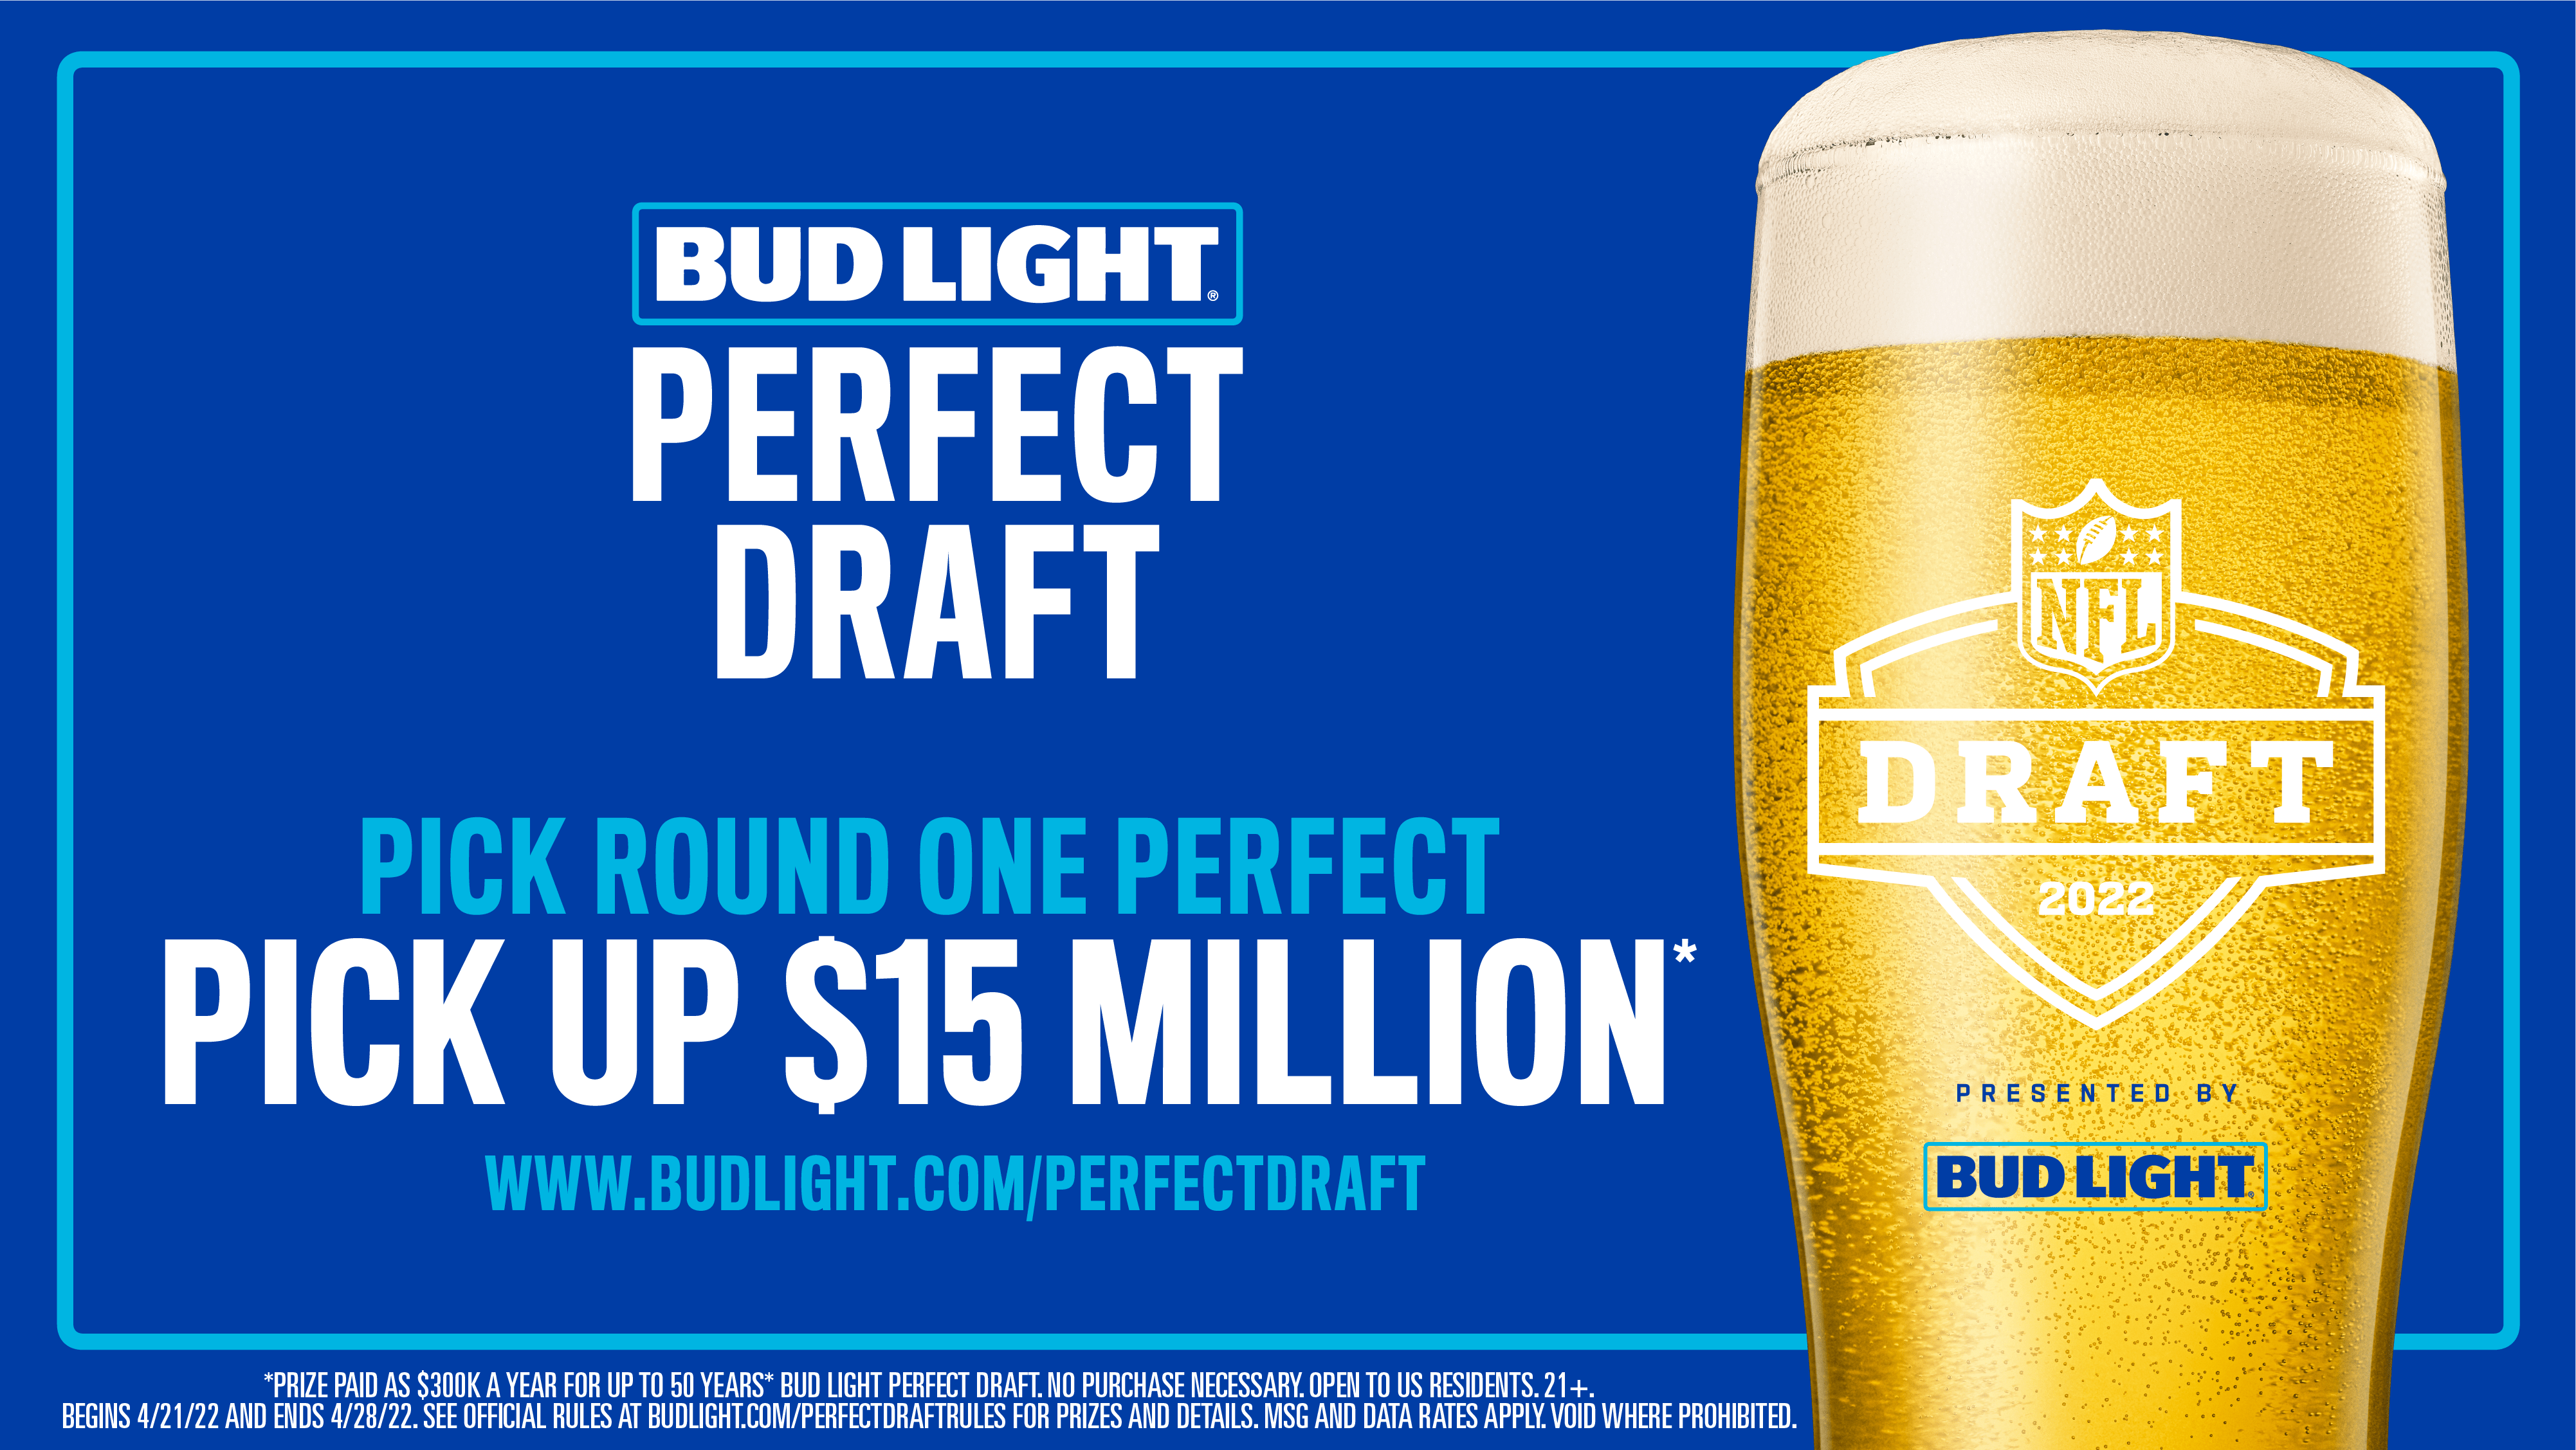 Bud Light and Former First-Round Pick Greg Olsen Challenge Fans to Pick the ‘Perfect Draft’ Ahead of 2022 NFL Draft